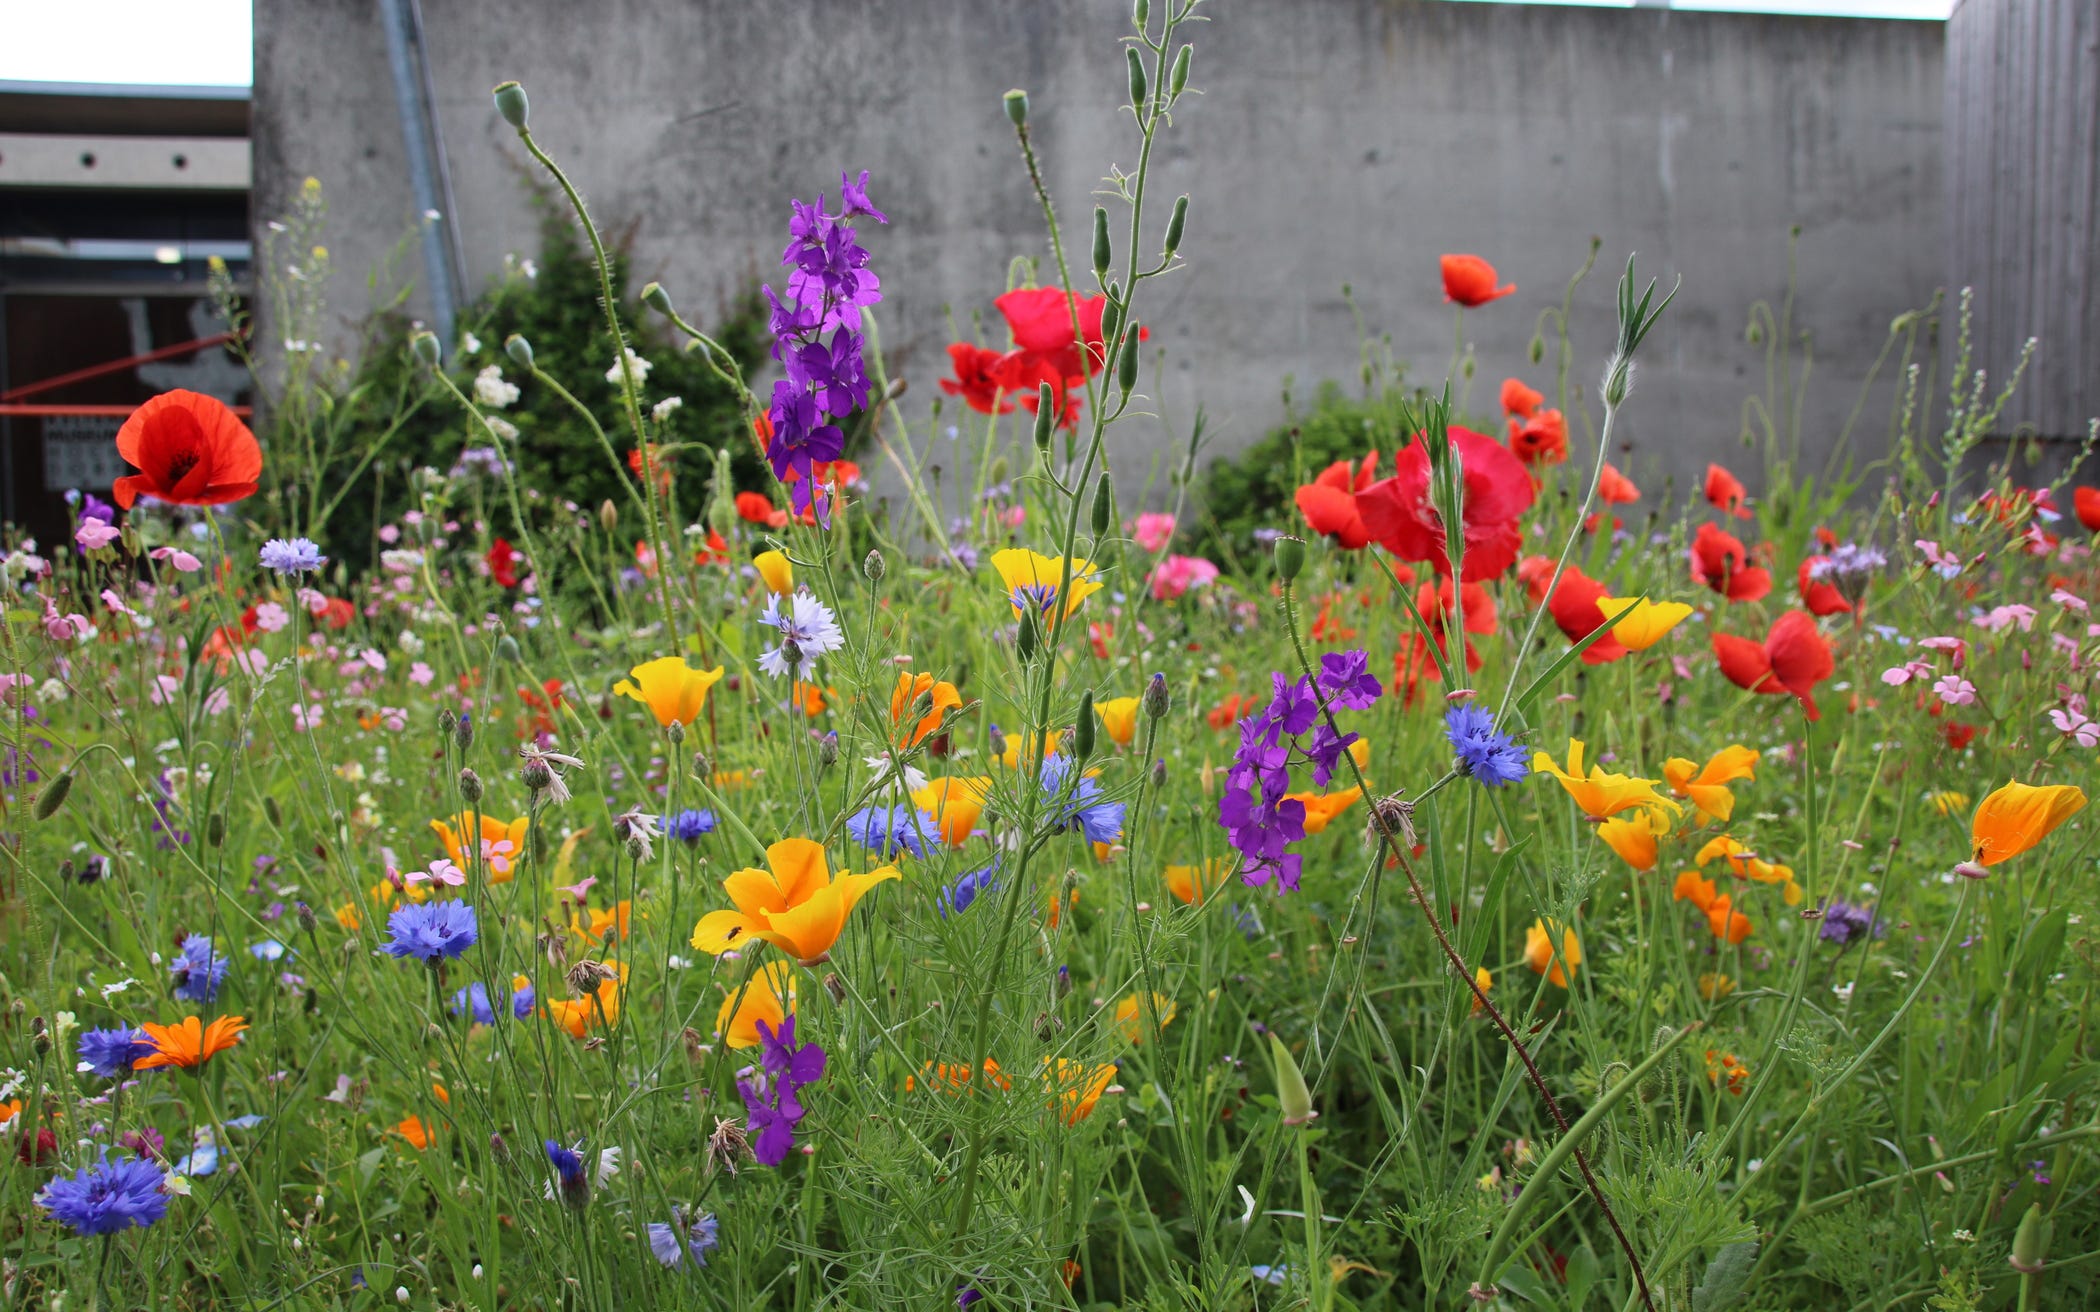 Our easy-to-grow All Annual Wildflower Seed Mix can even add color in small spaces and urban areas.